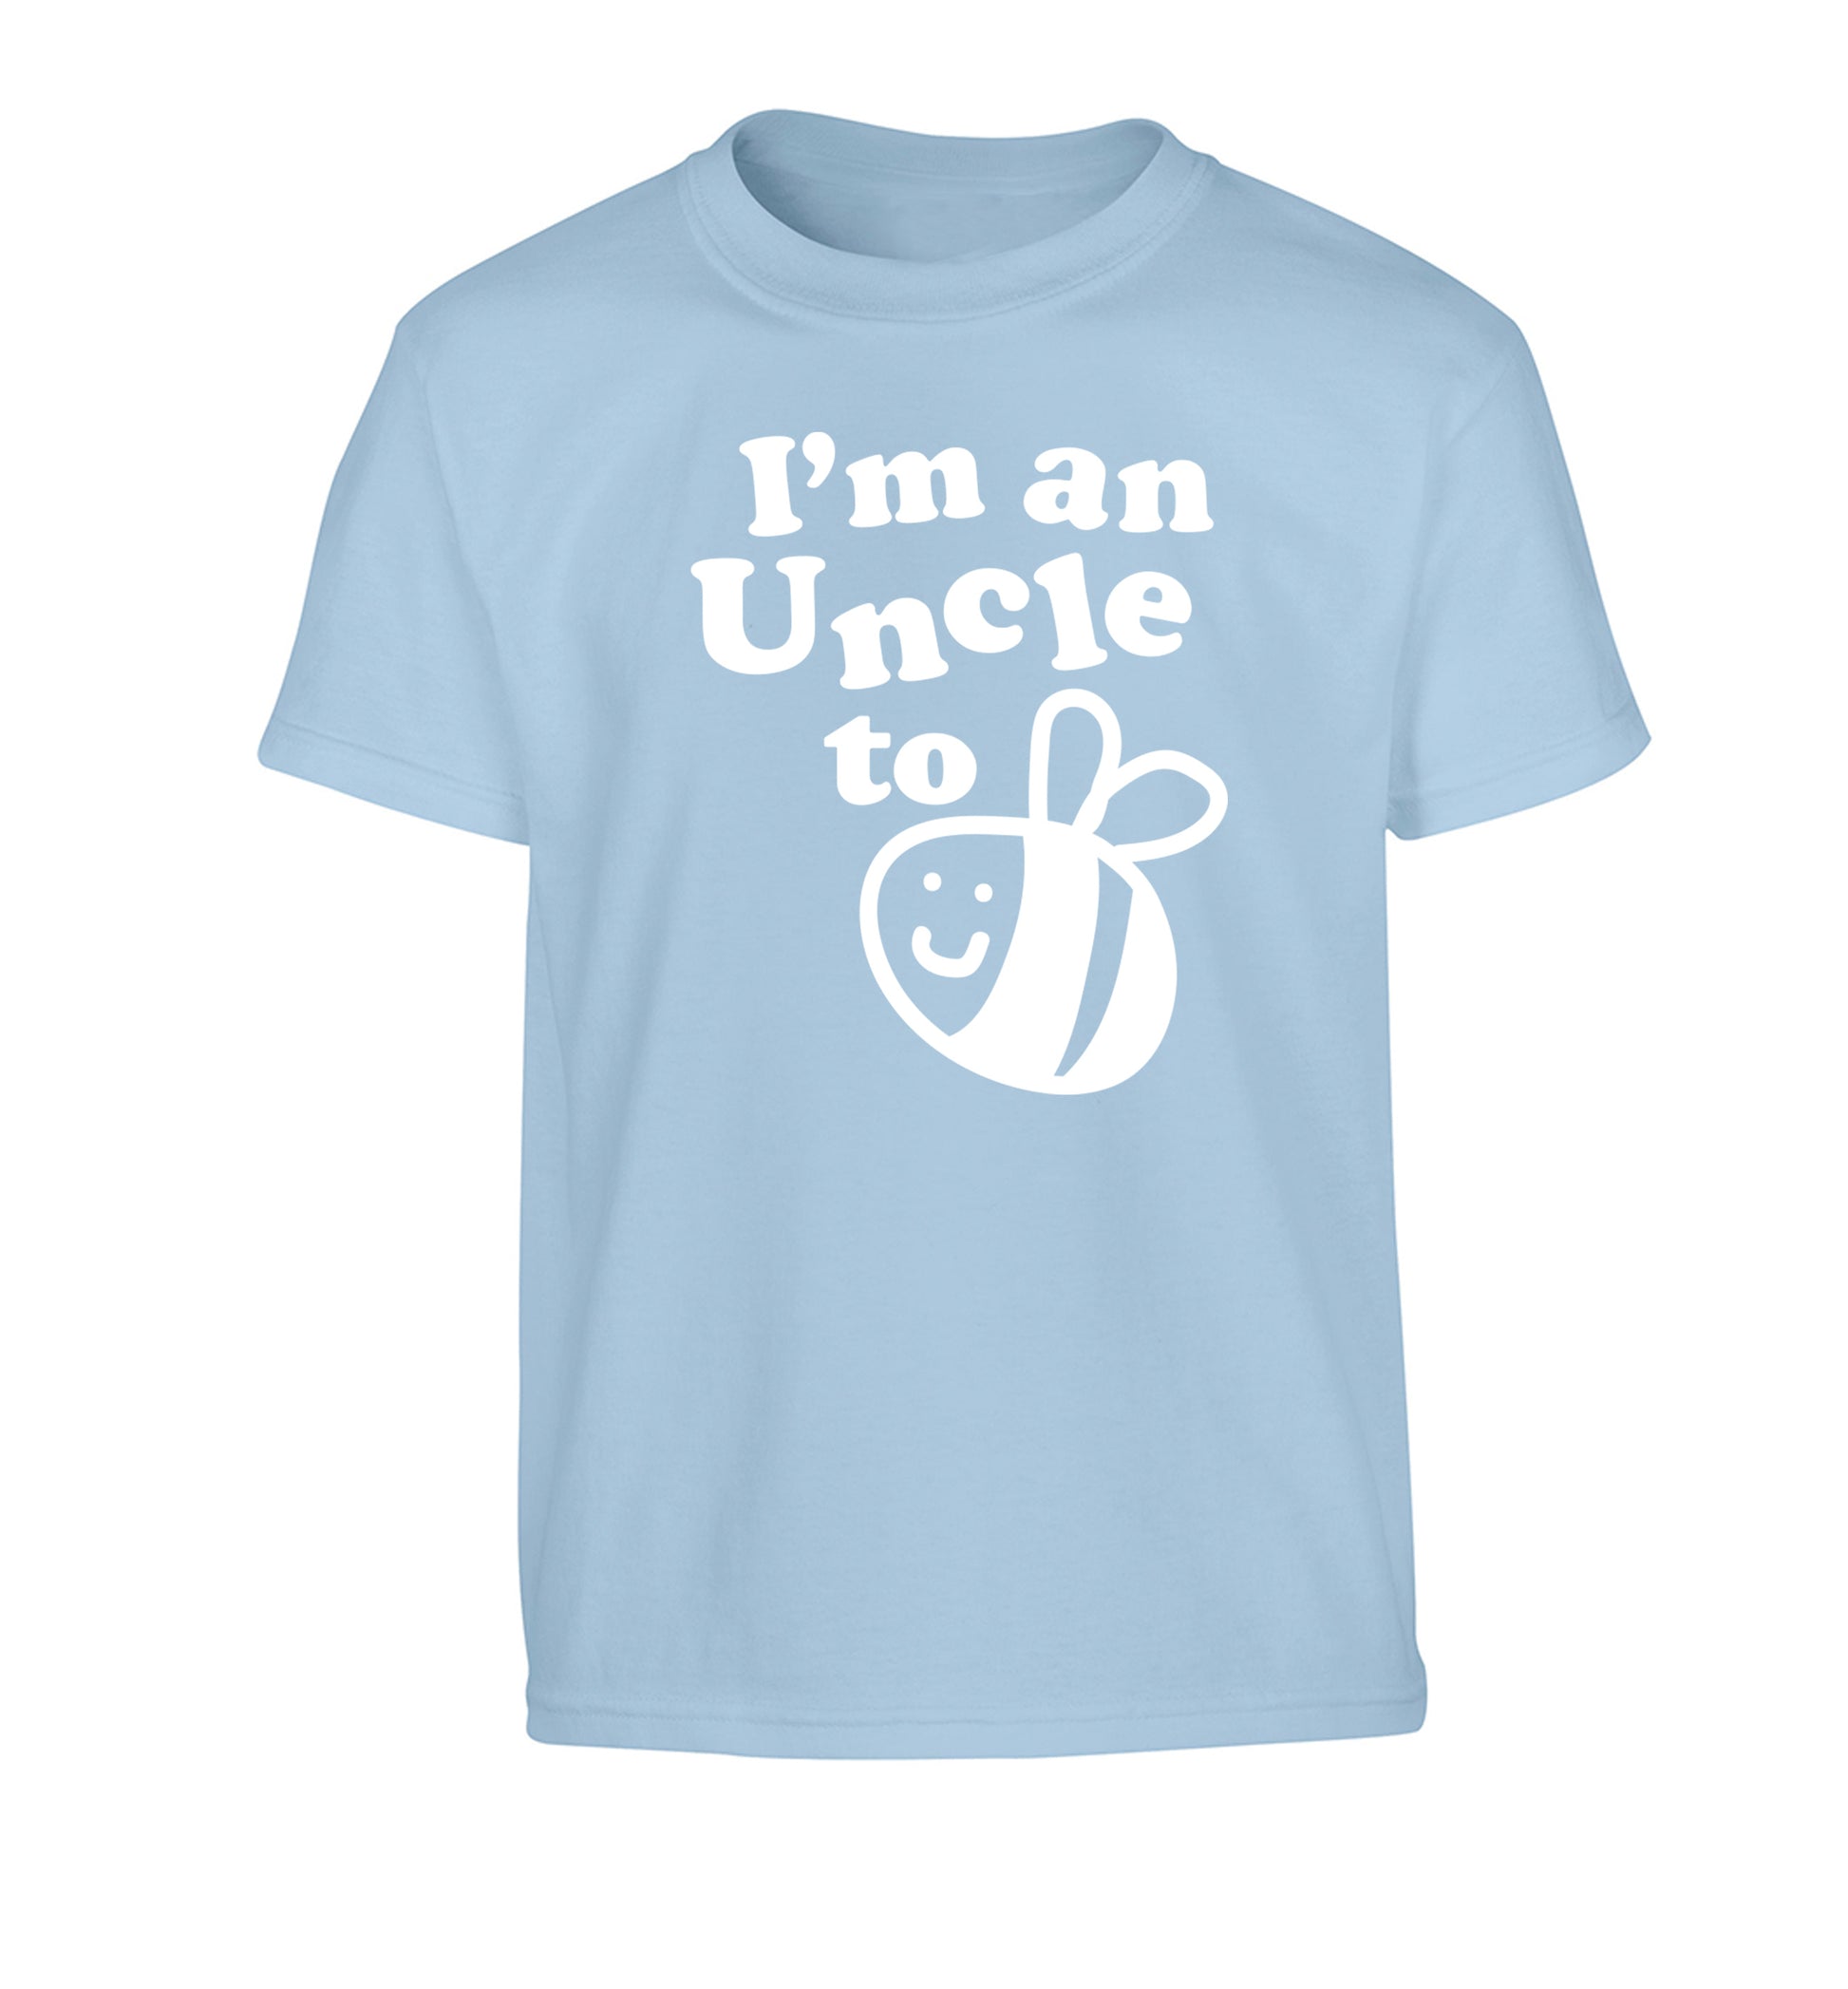 I'm an uncle to be Children's light blue Tshirt 12-14 Years